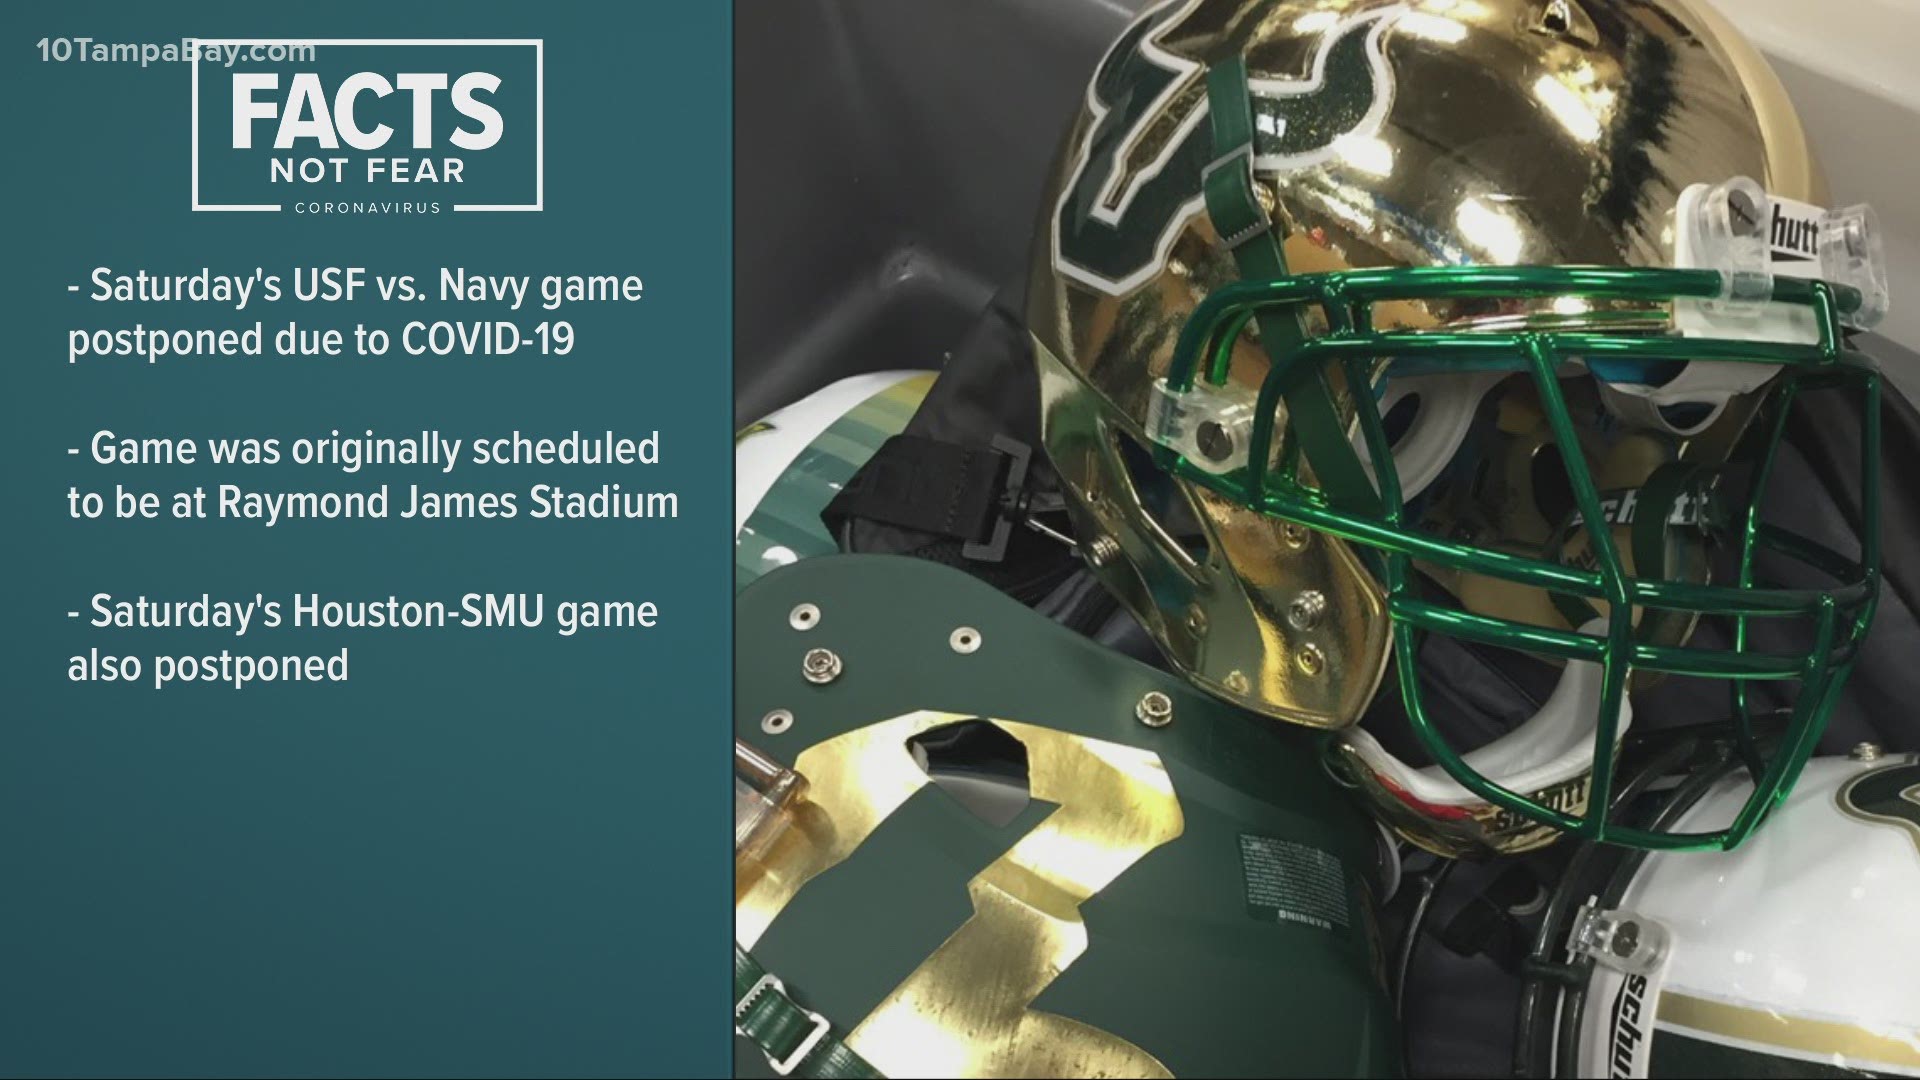 The American Athletic Conference said the USF-Navy match is one of two Saturday football games postponed because of positive COVID-19 tests.